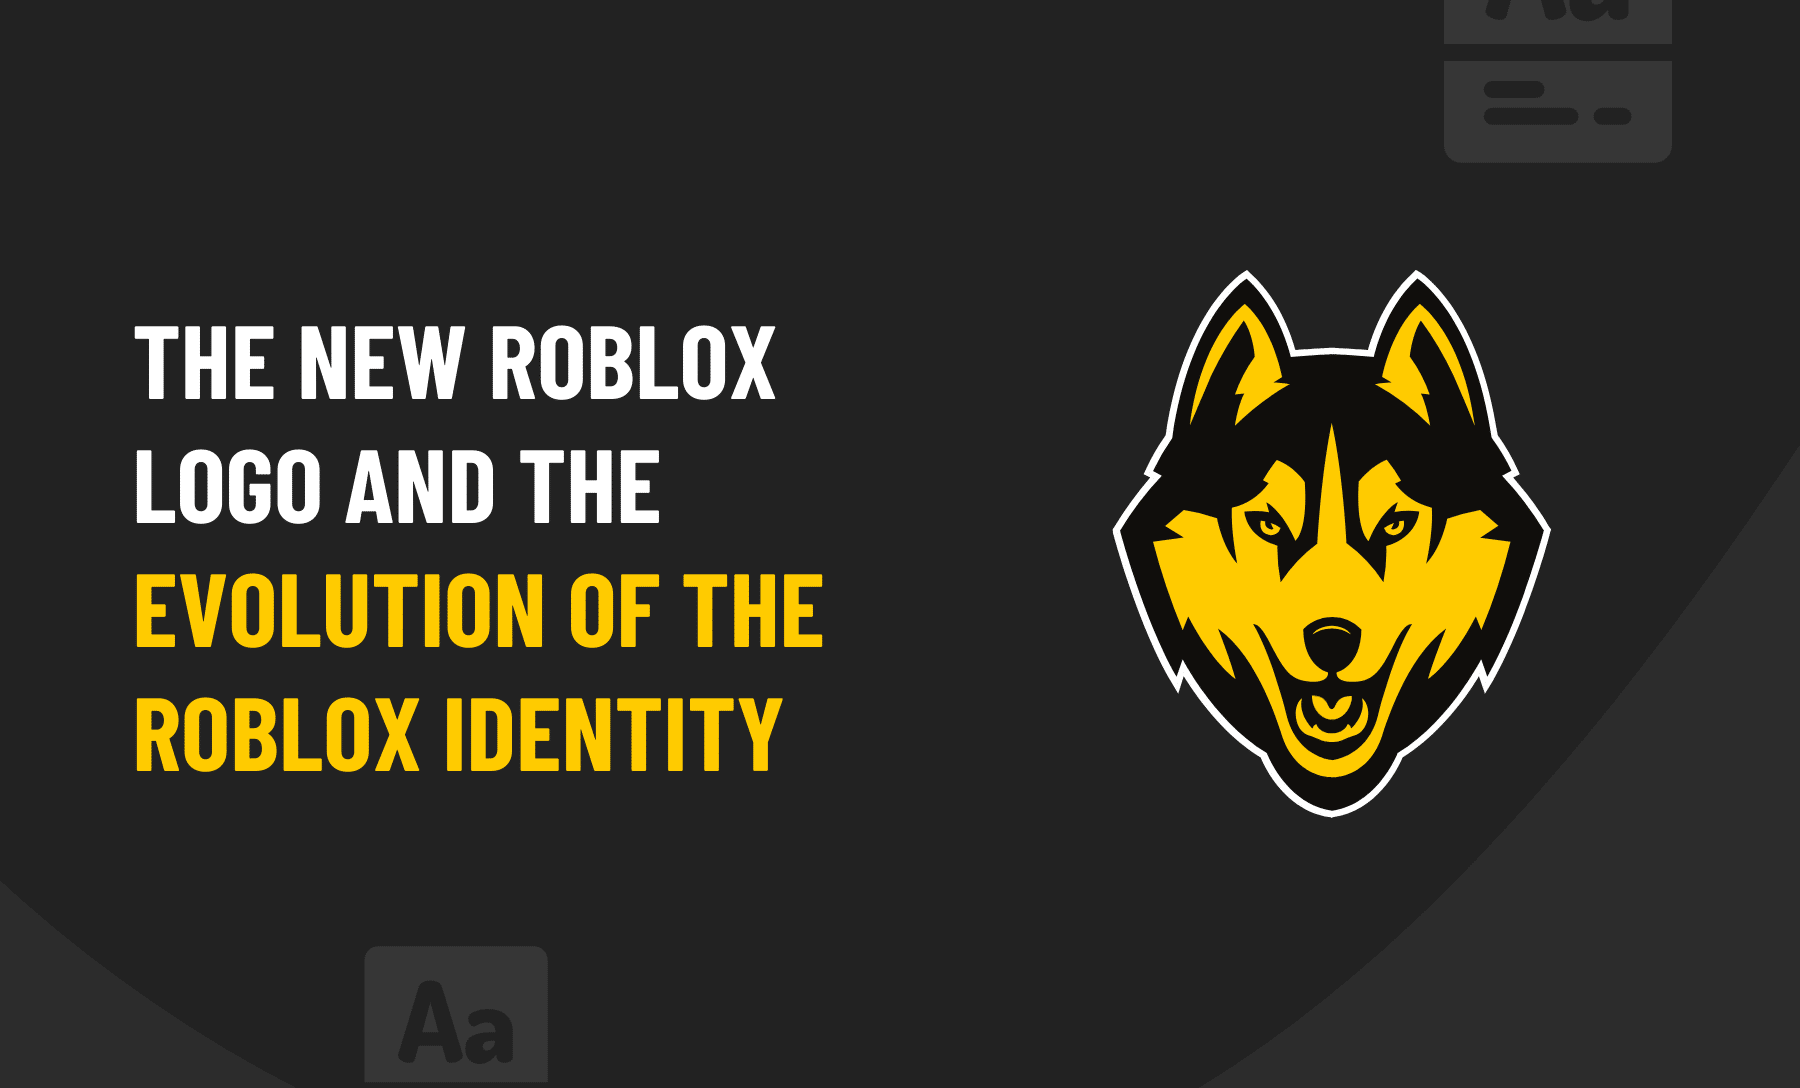 The evolution of the Roblox Studio logo #fyp #roblox #robloxfyp #guest